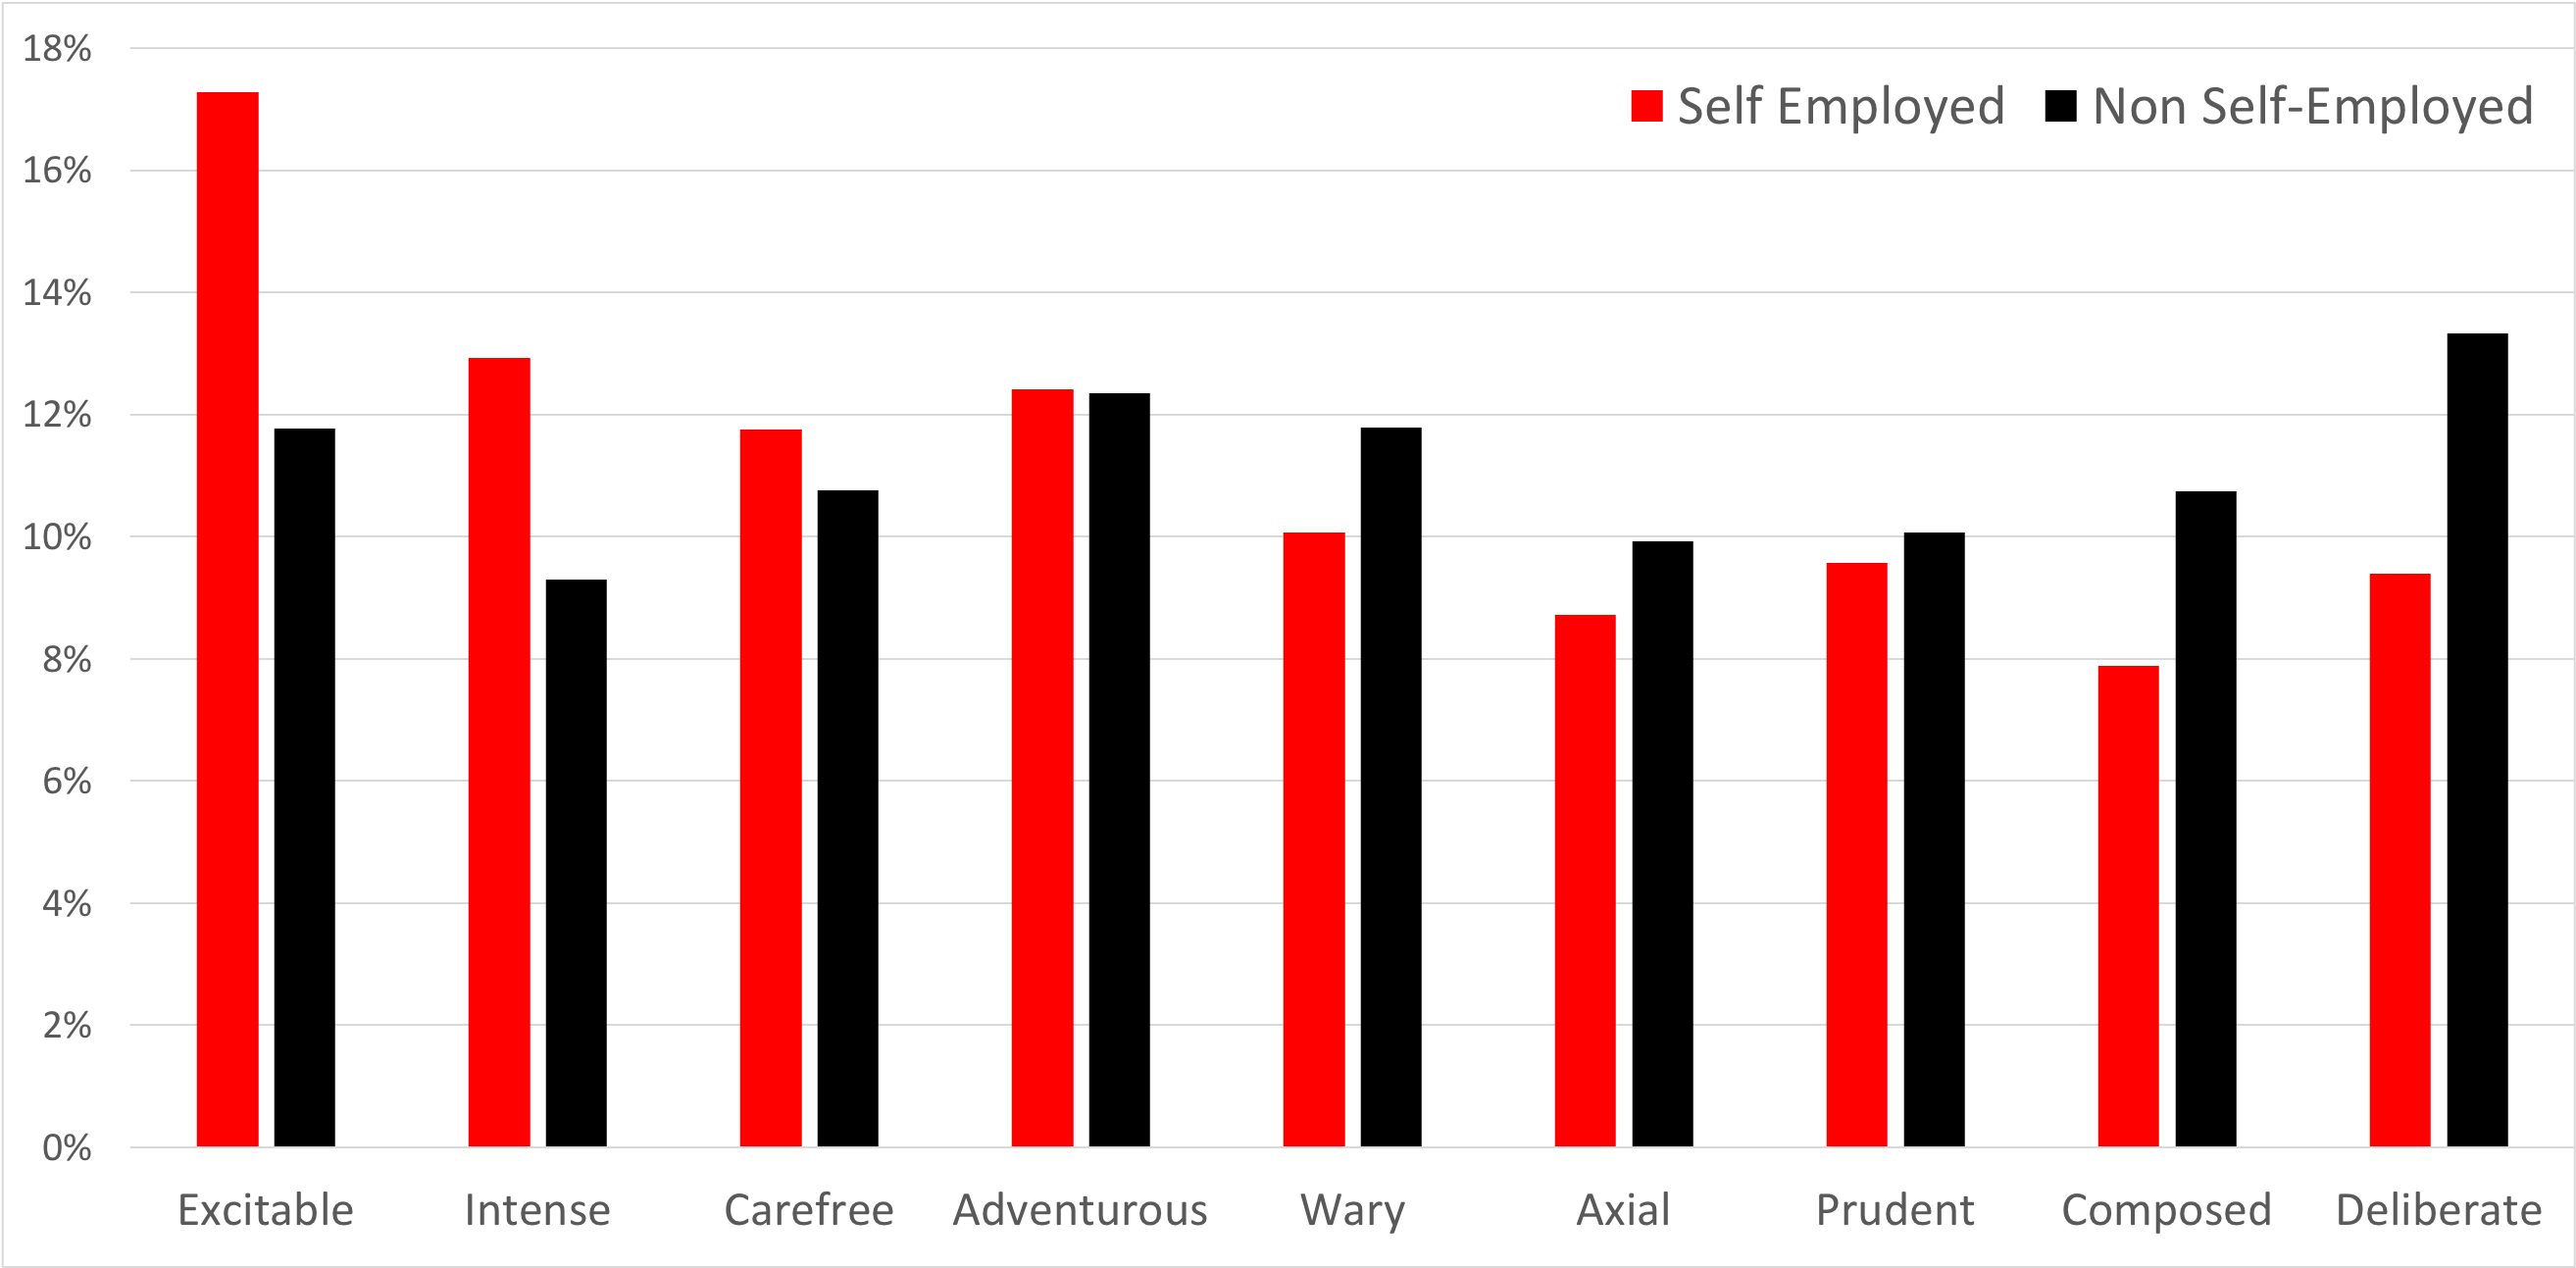 Risk Type Comparison: are risk takers more likely to be self-employed?